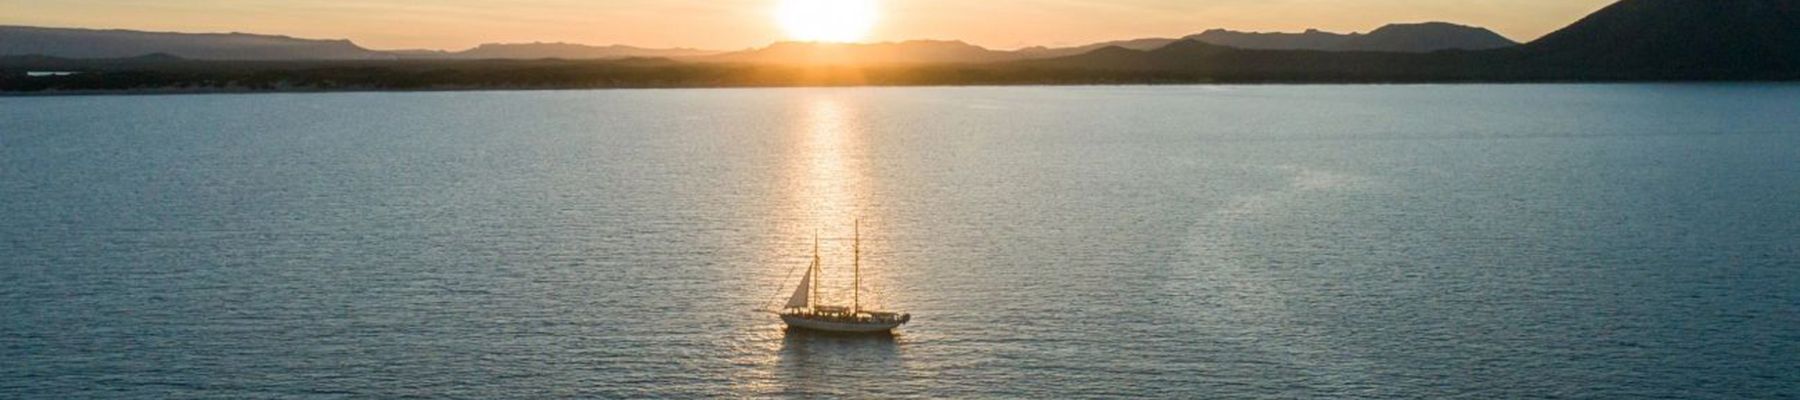 Derwent Hunter boat sailing into sunset in the Whitsundays